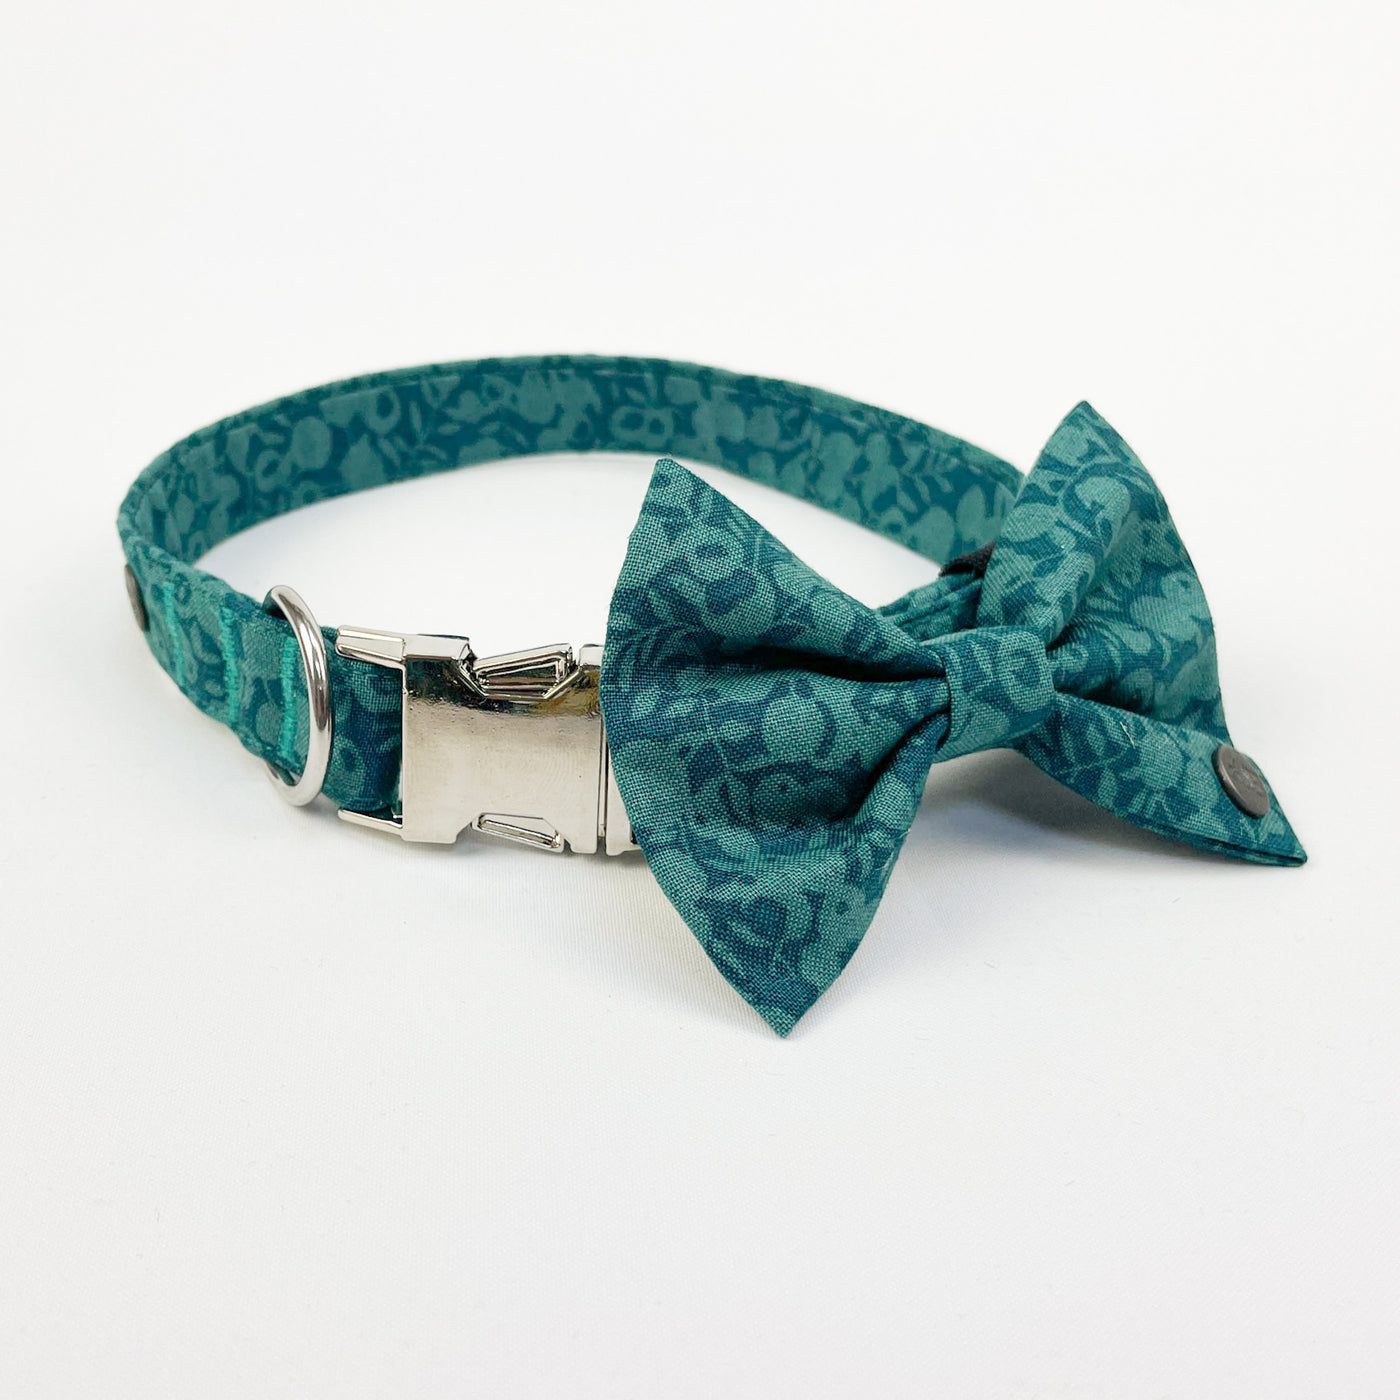 Liberty Autumn Emerald Dog Bow Tie shown on matching collar.